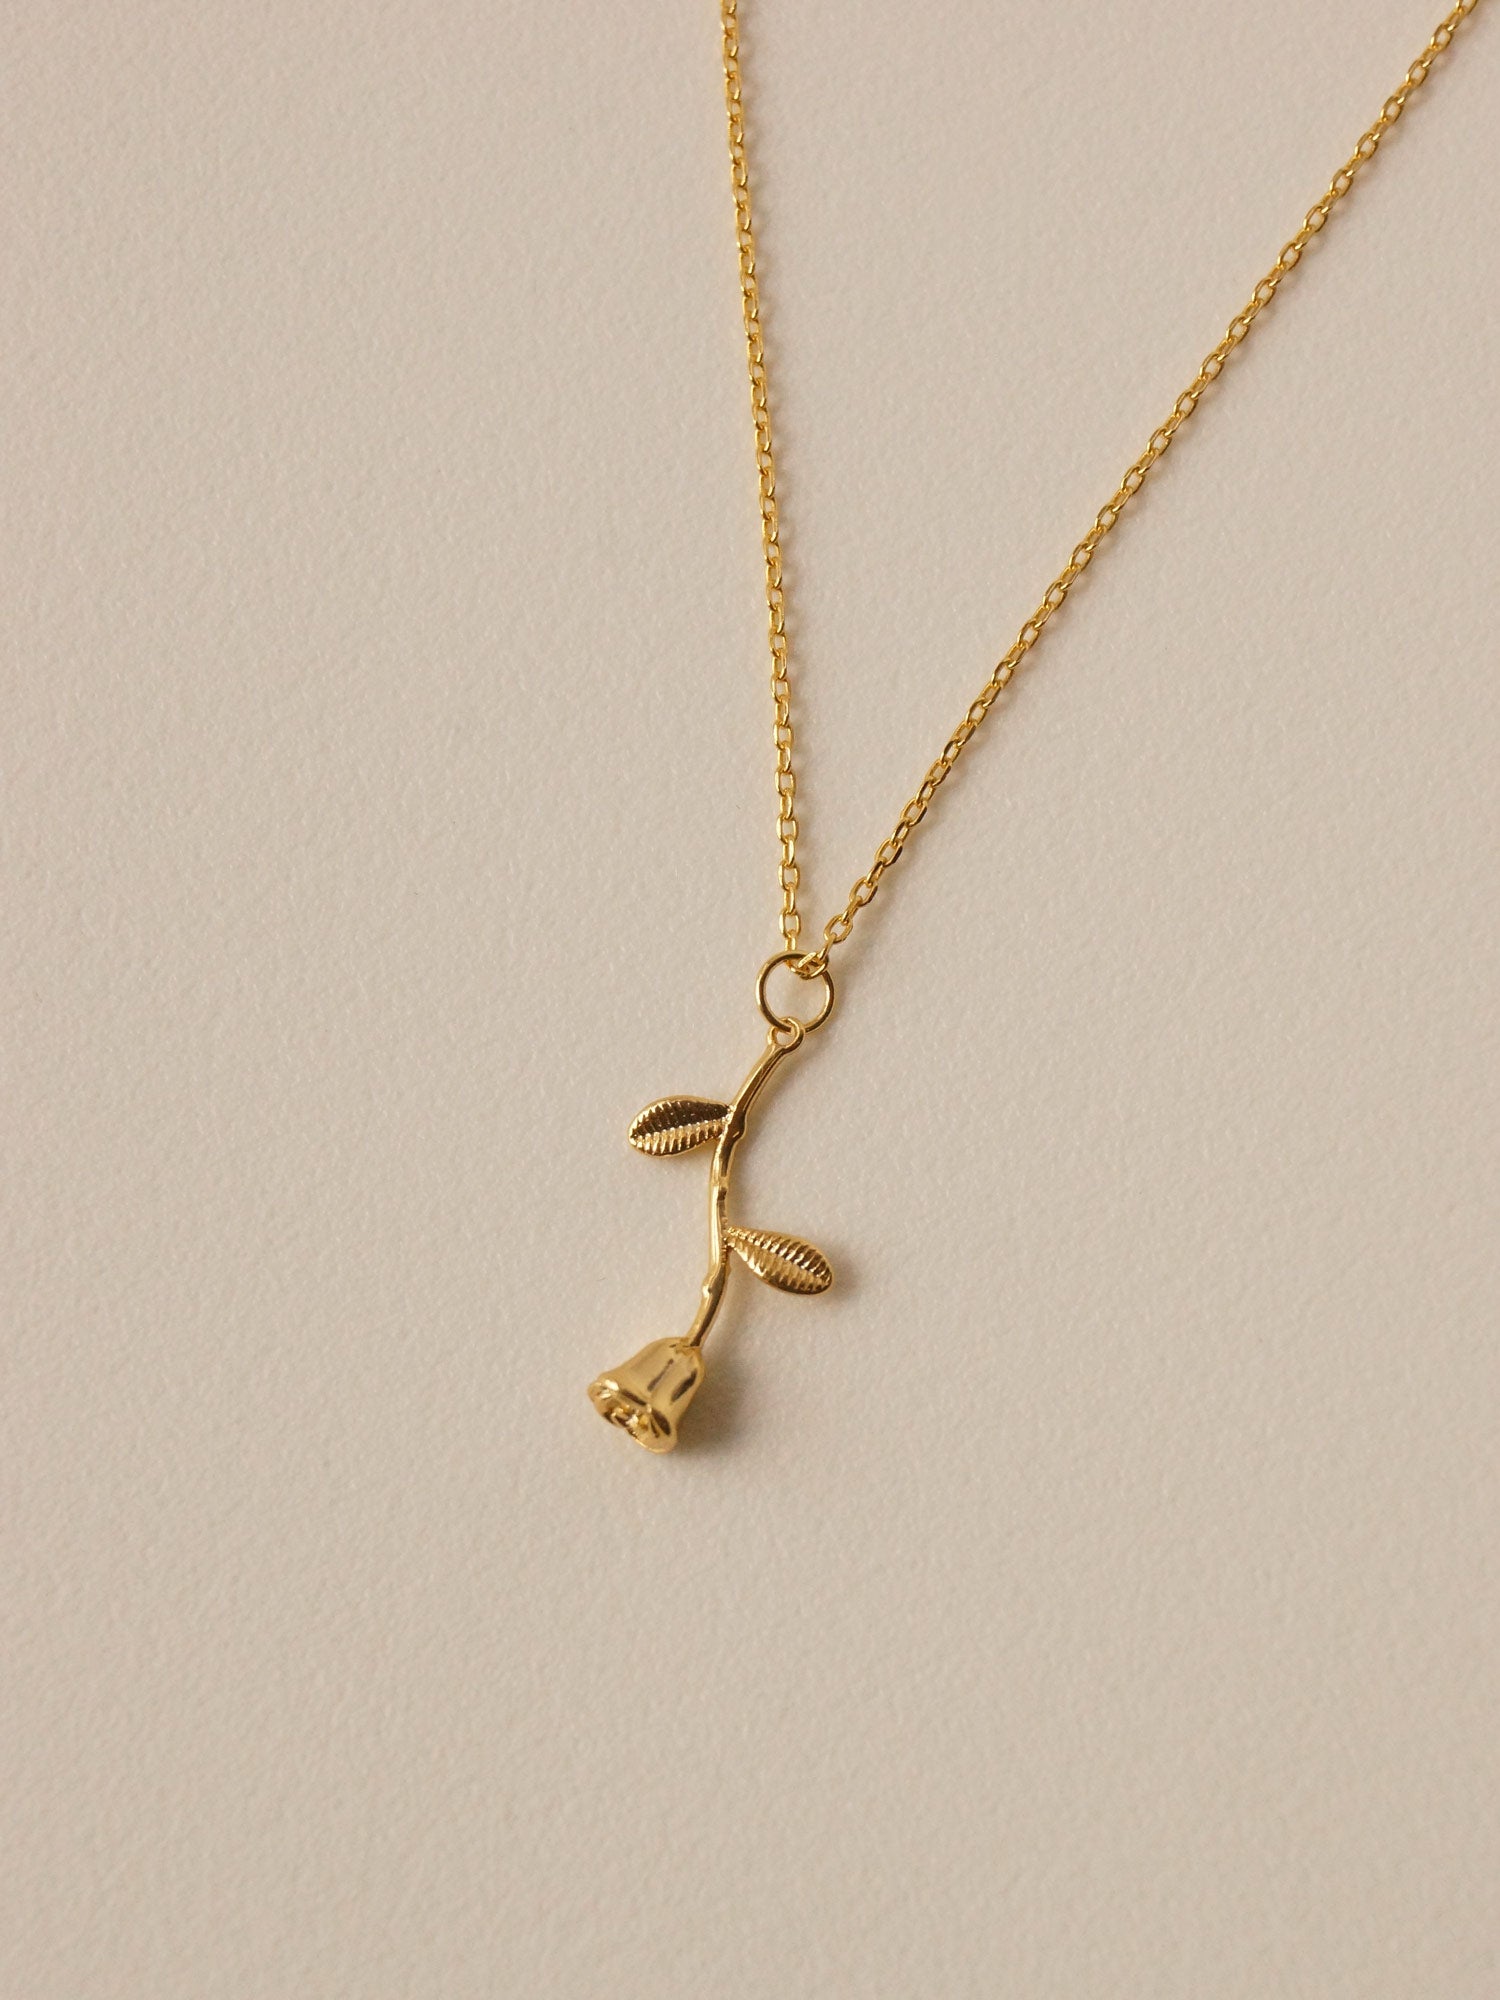 DARIA Necklace *18K Gold-plated